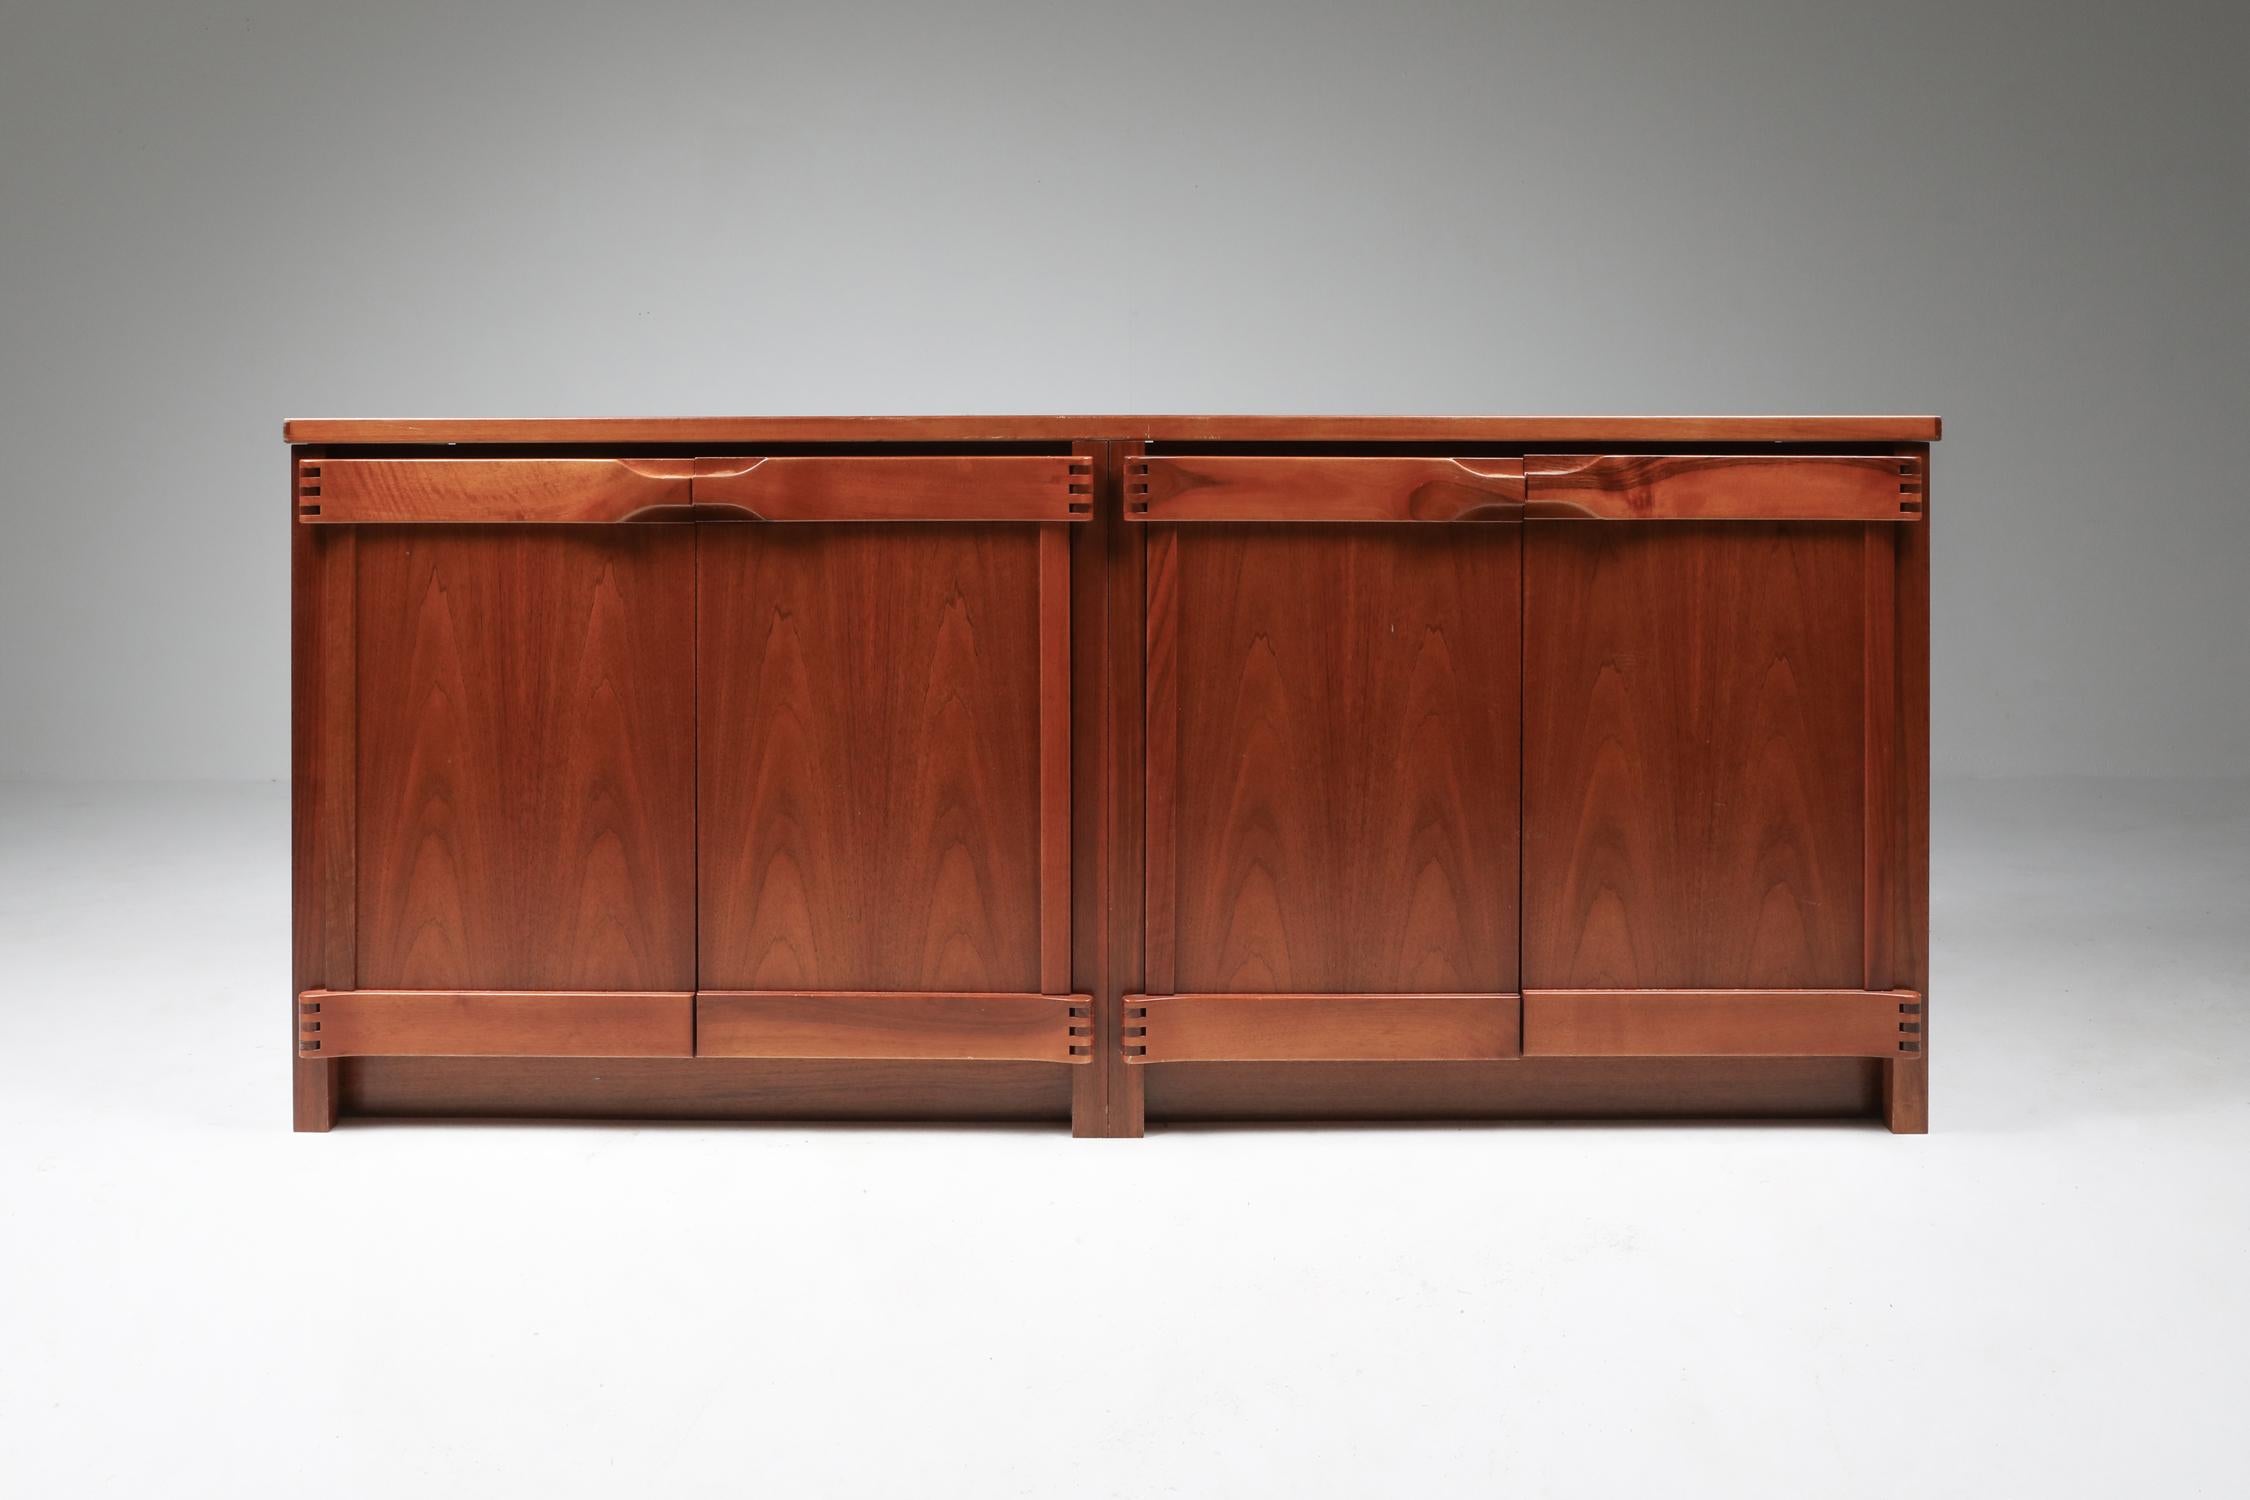 Pierre Chapo style sideboard in walnut by Franz Xaver Sproll, 1960s.
Fantastic use of hinges and connections just as Pierre Chapo did in the same era.
    

